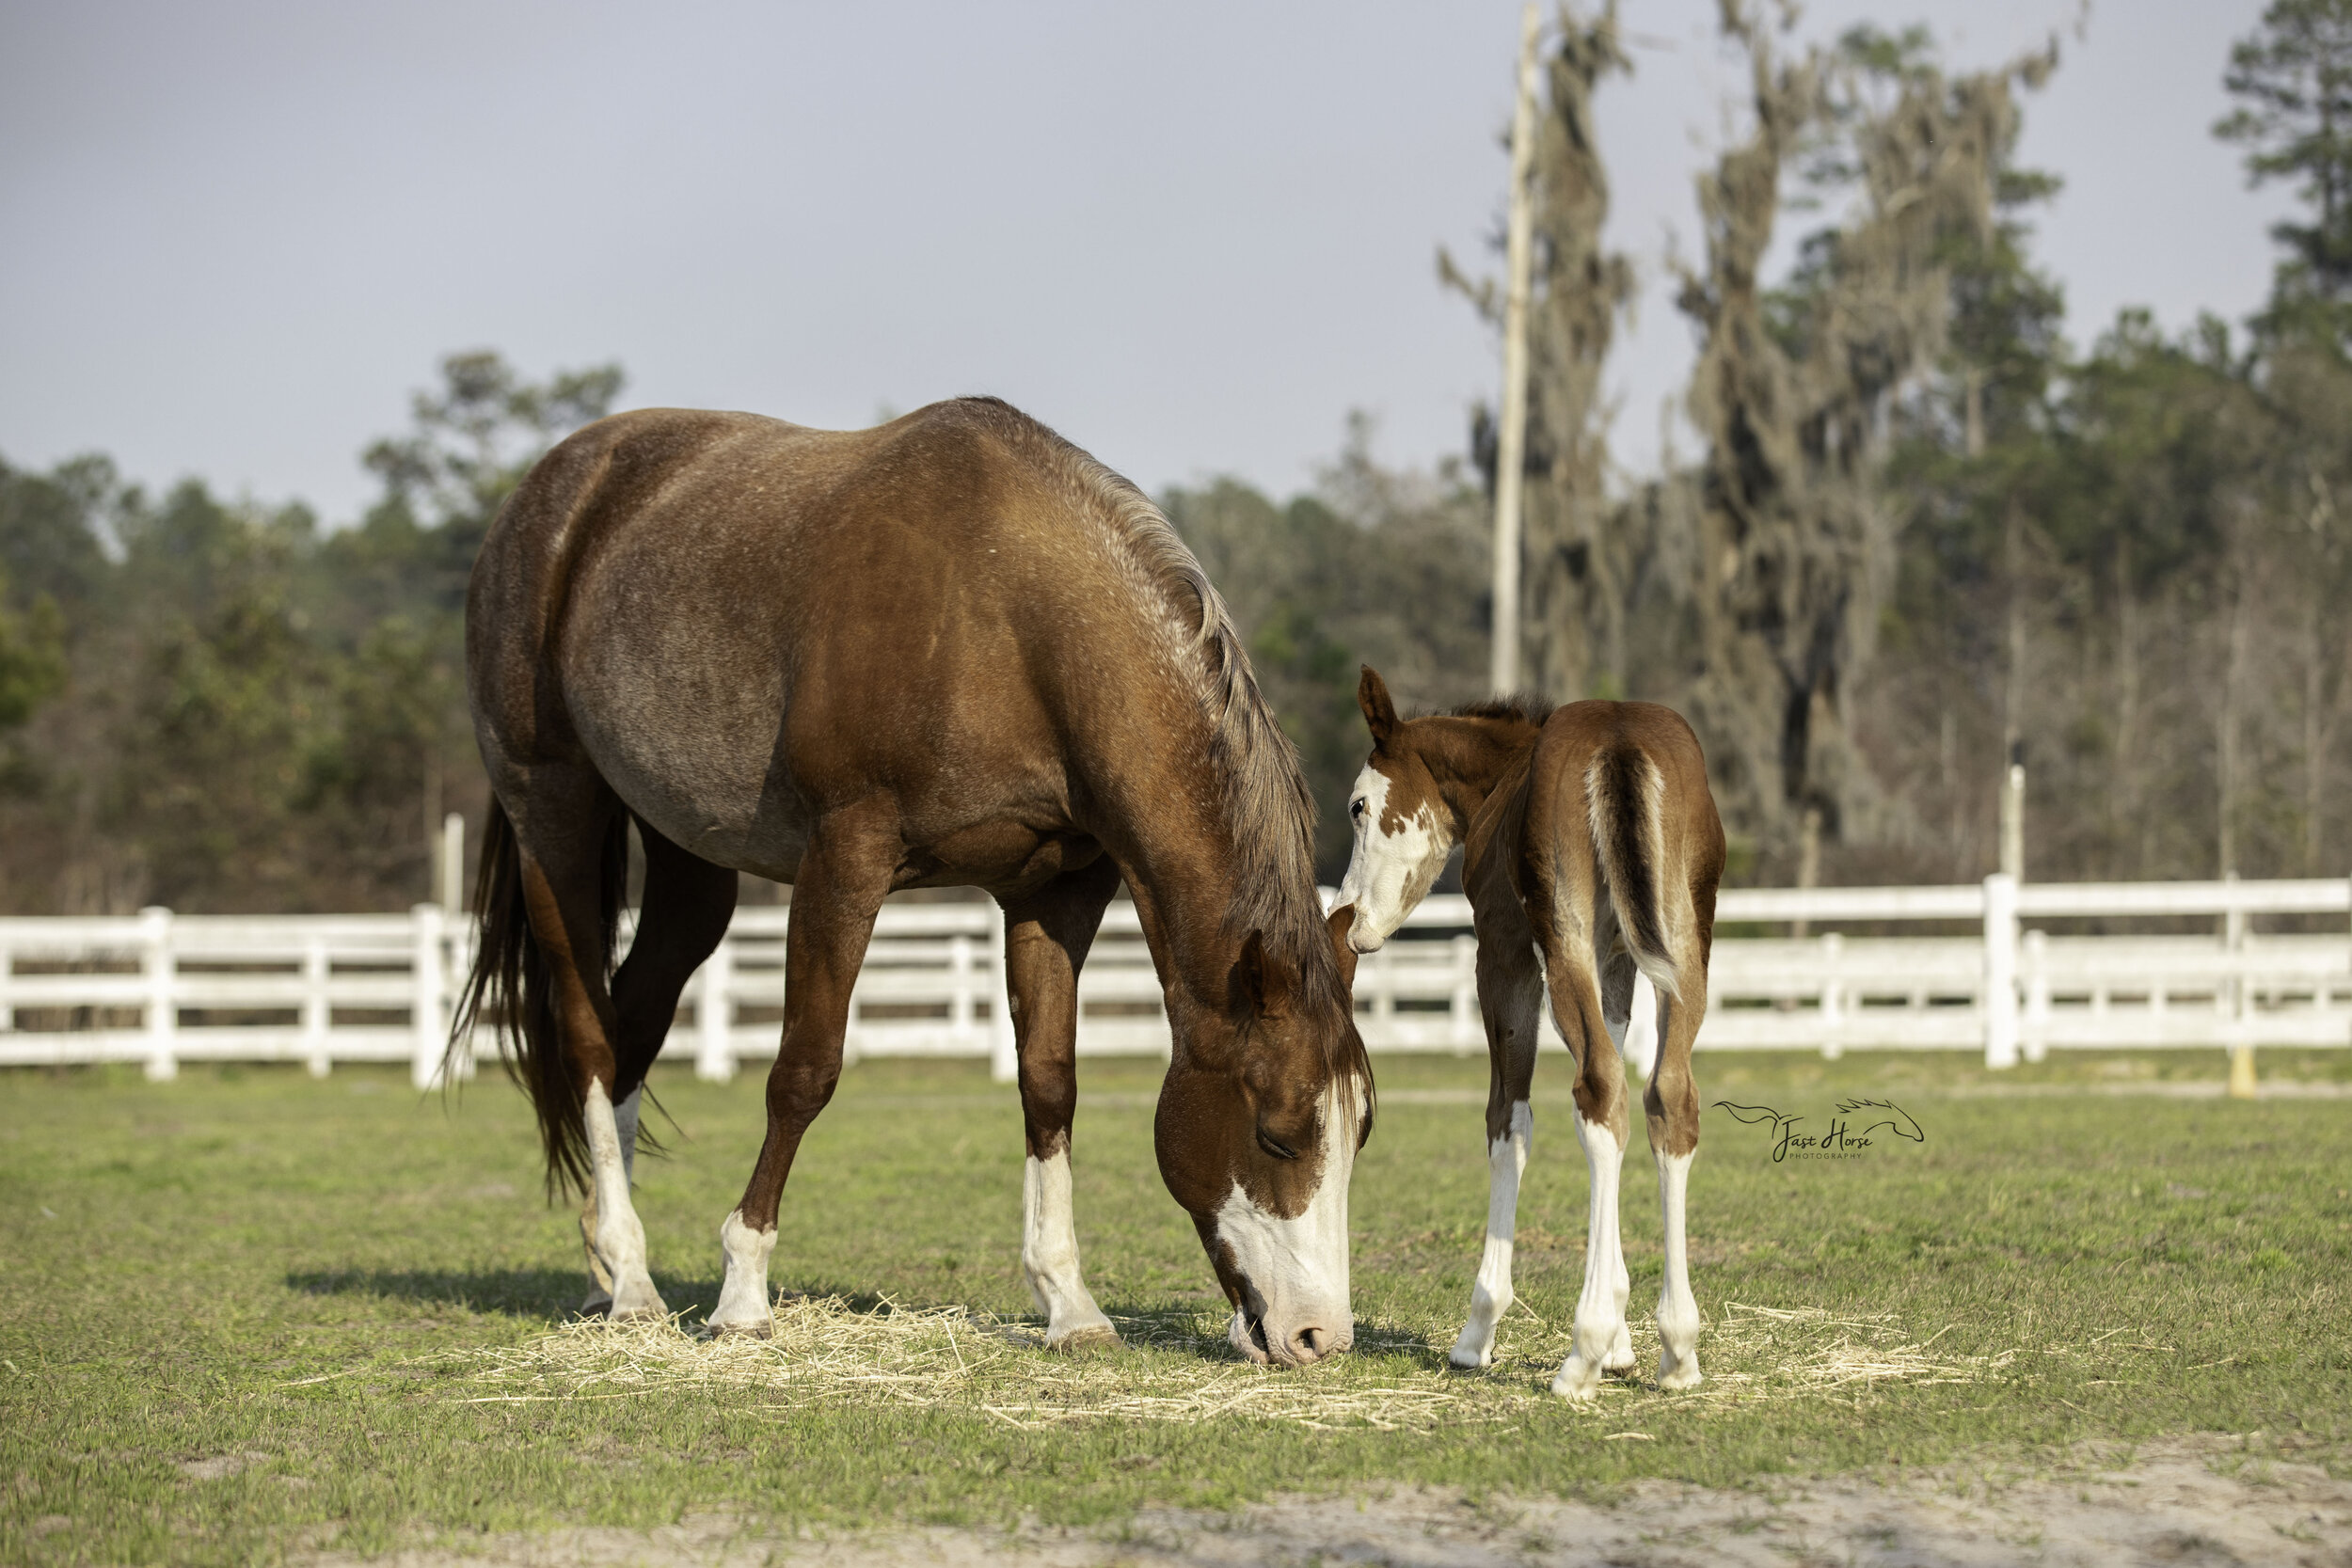 APHA_Foal_Colt_Florida_Fast Horse Photography_3.jpg